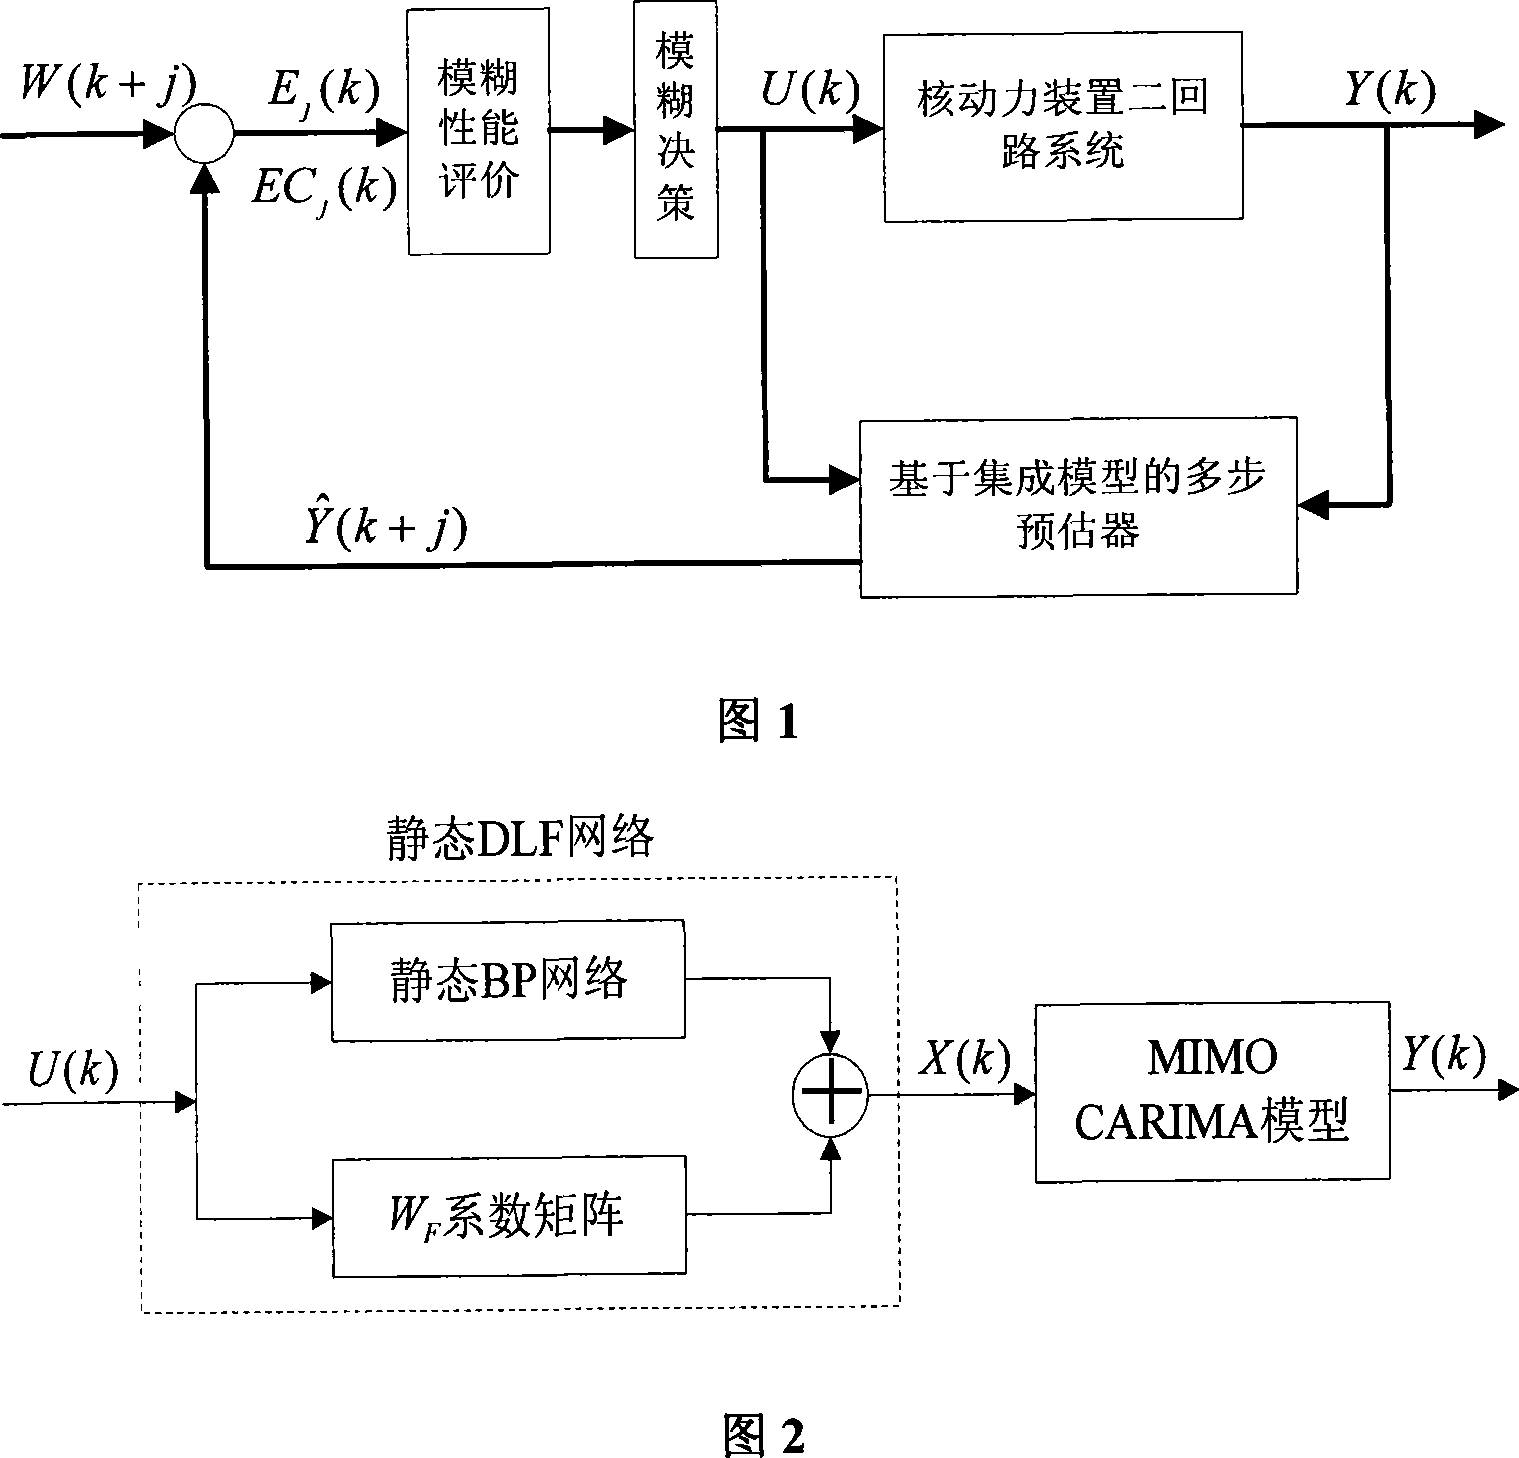 Nuclear power device two-loop multi-variable integrated model fuzzy predication control method